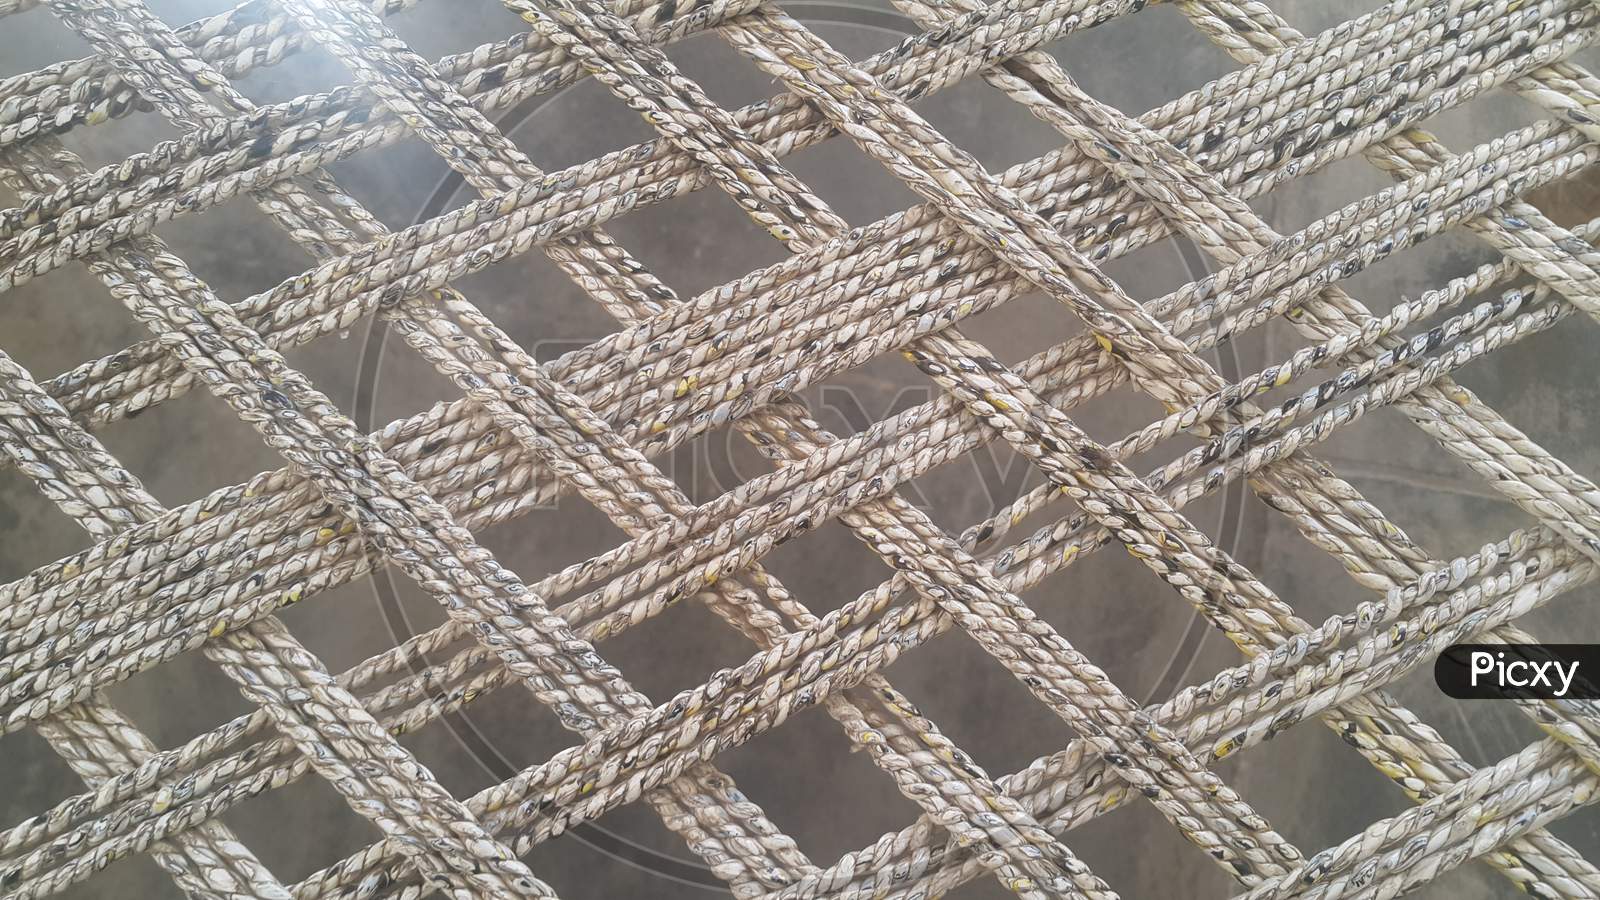 Dried Jute Thread Or Ropes Interwoven For Making Traditional Bed Called Charpai